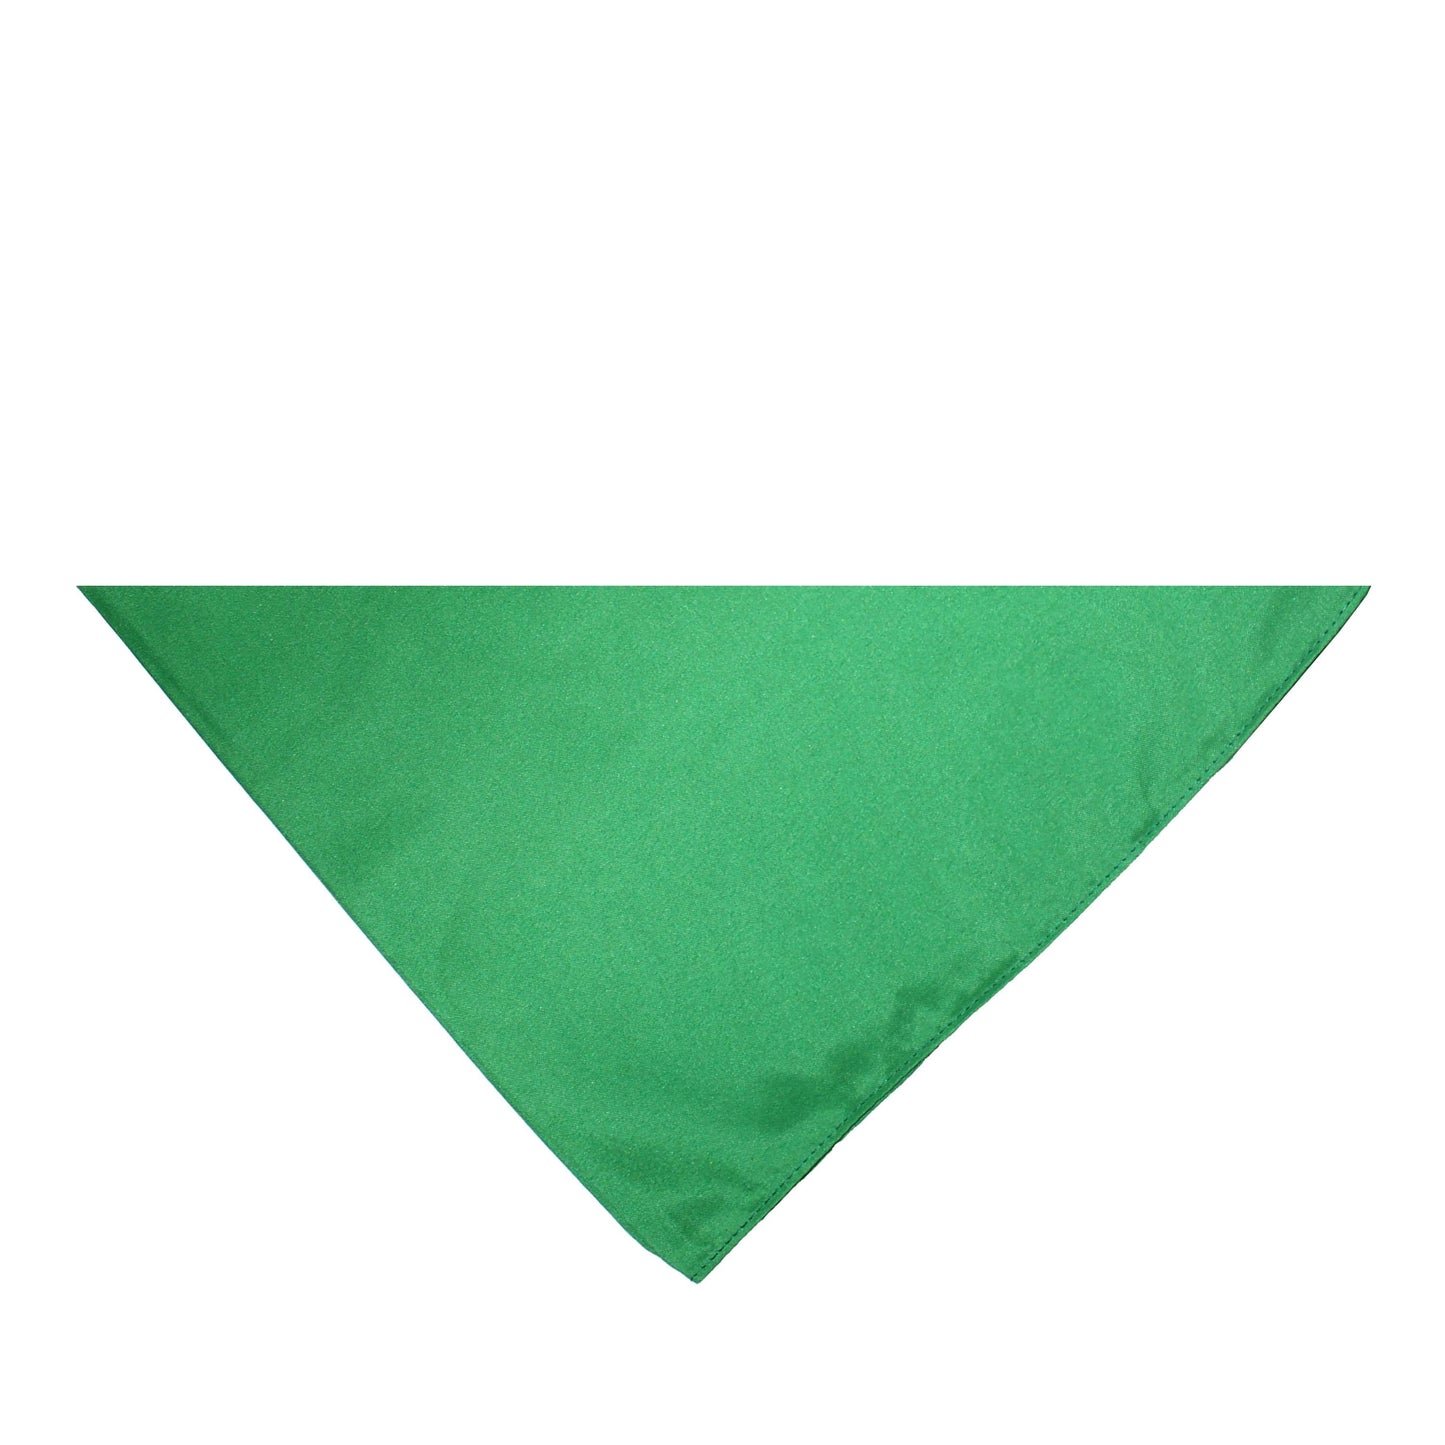 Pack of 9 Triangle Bandanas - Solid Colors and Polyester - 30 in x 19 in x 19 in